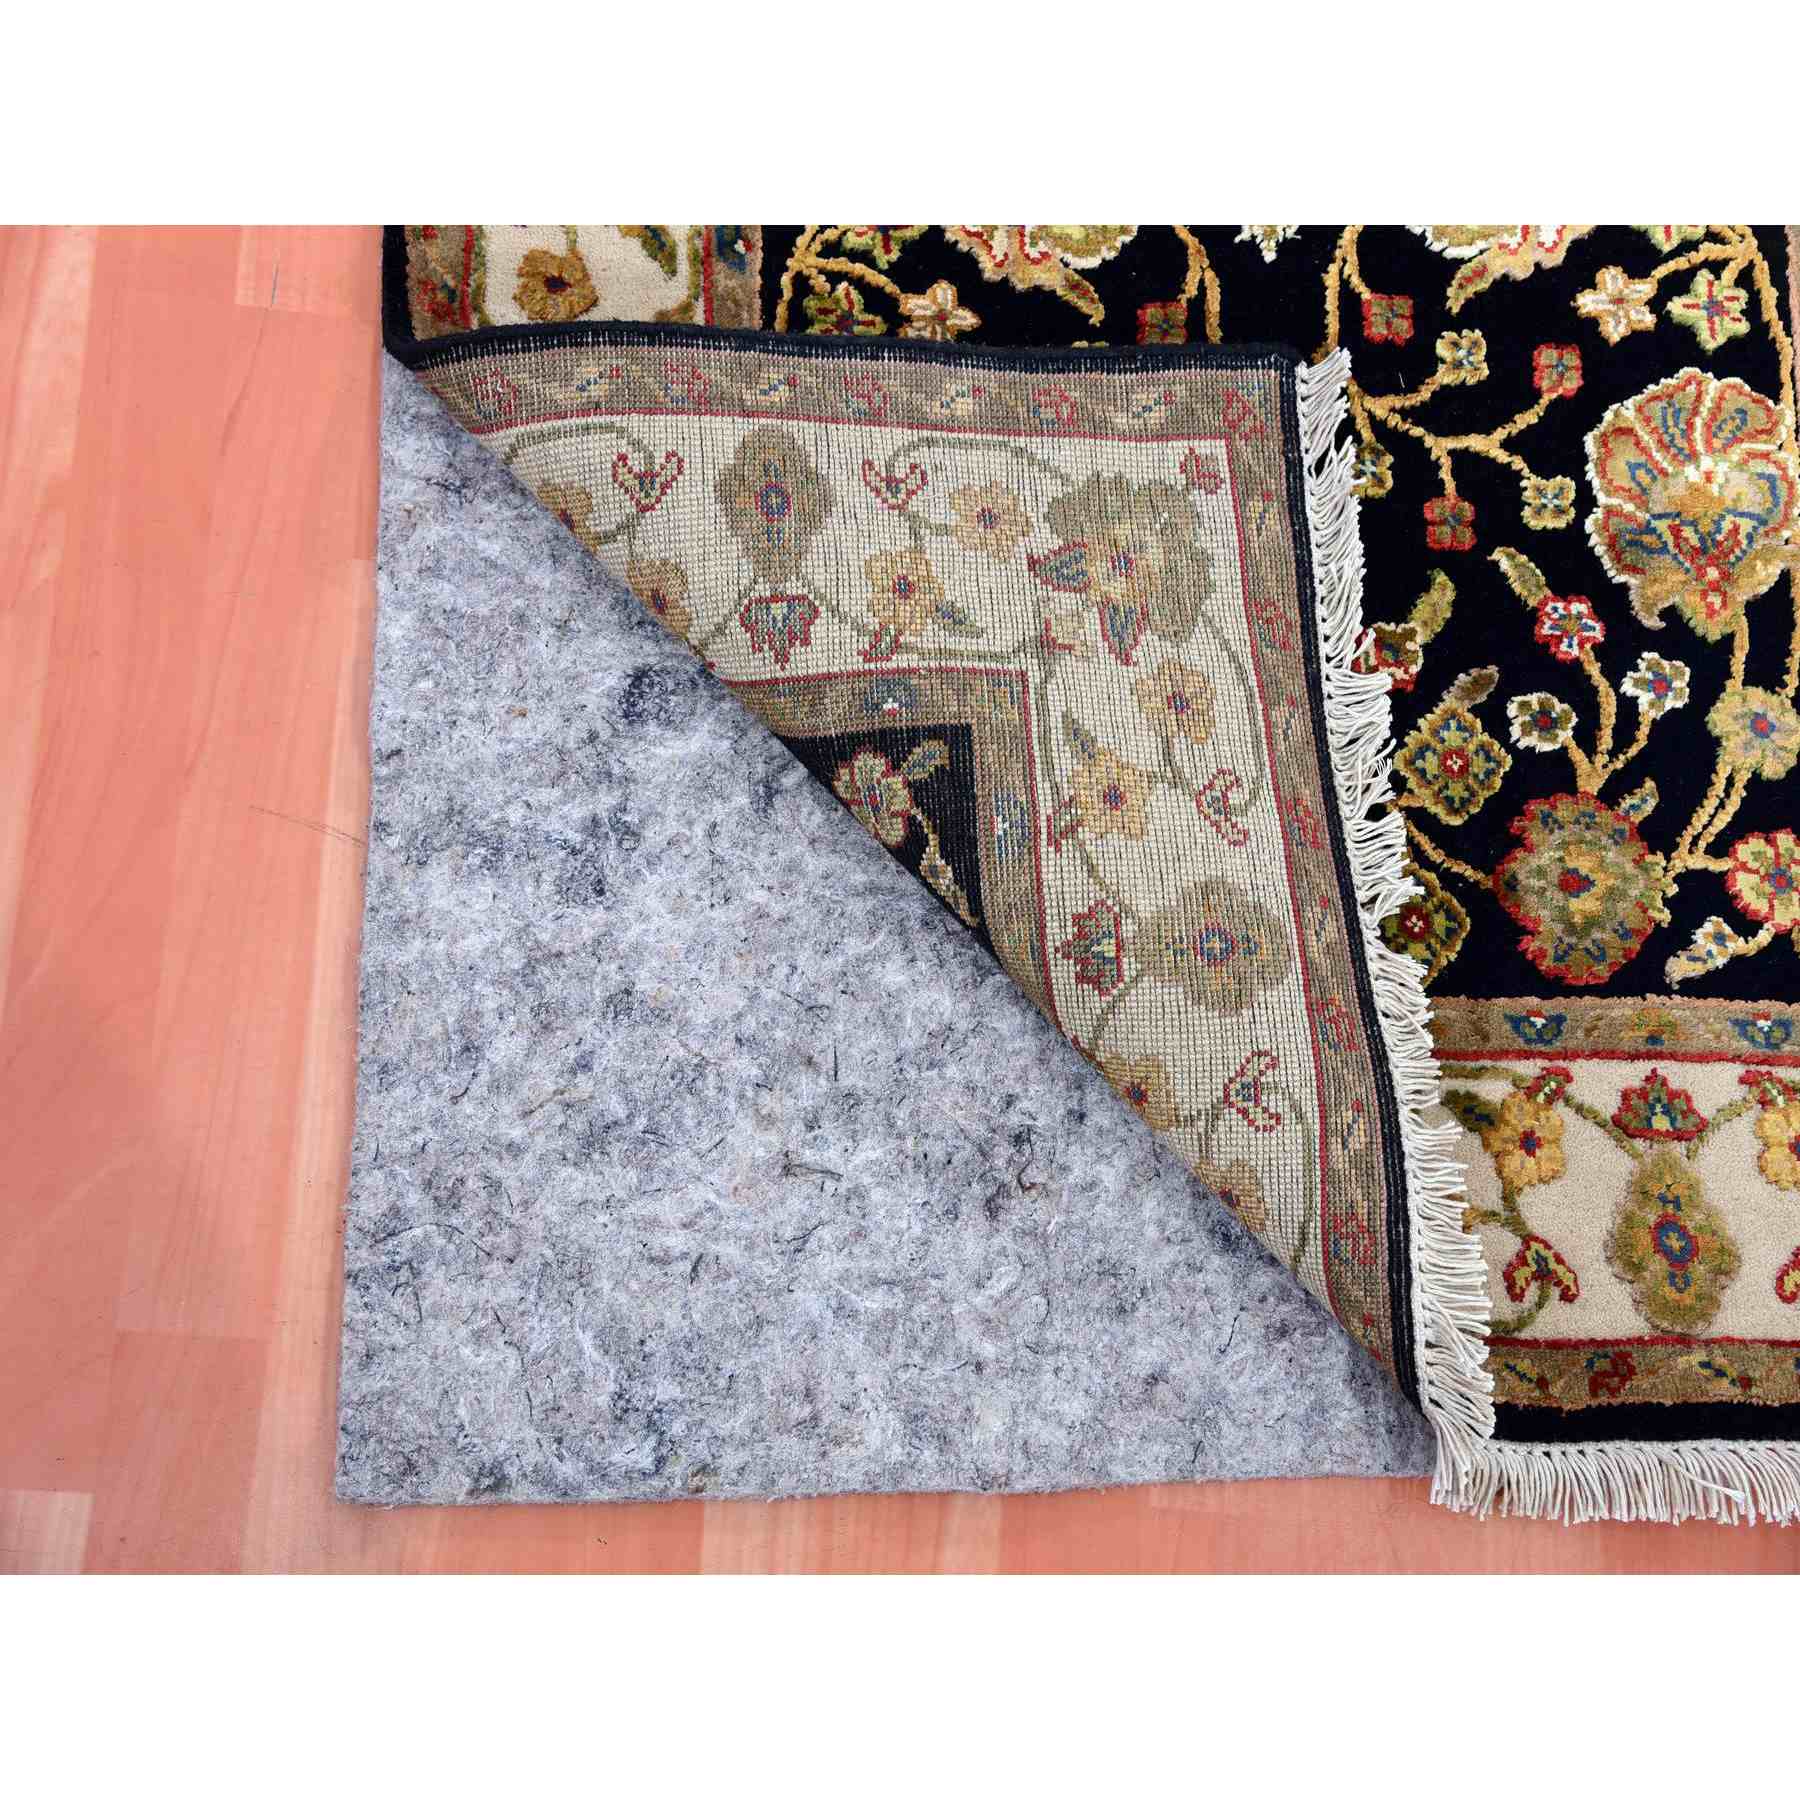 Rajasthan-Hand-Knotted-Rug-377040